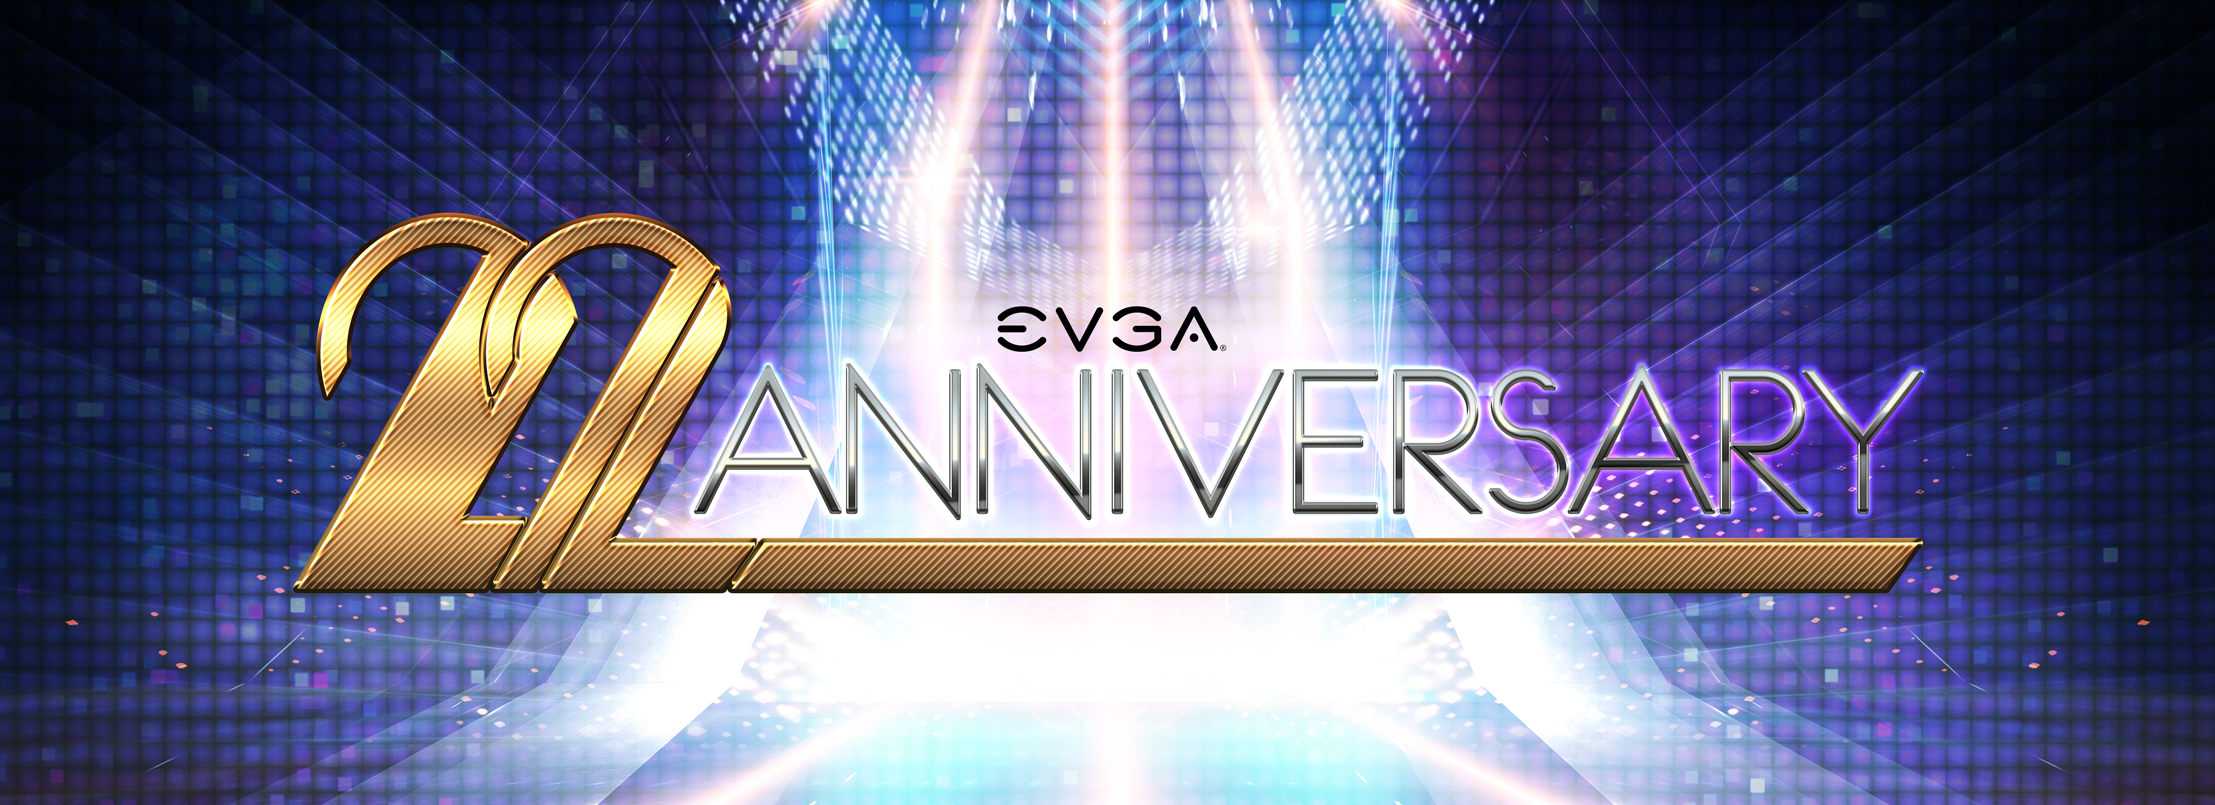 EVGA's 22nd Anniversary - Gamer Gear Giveaway